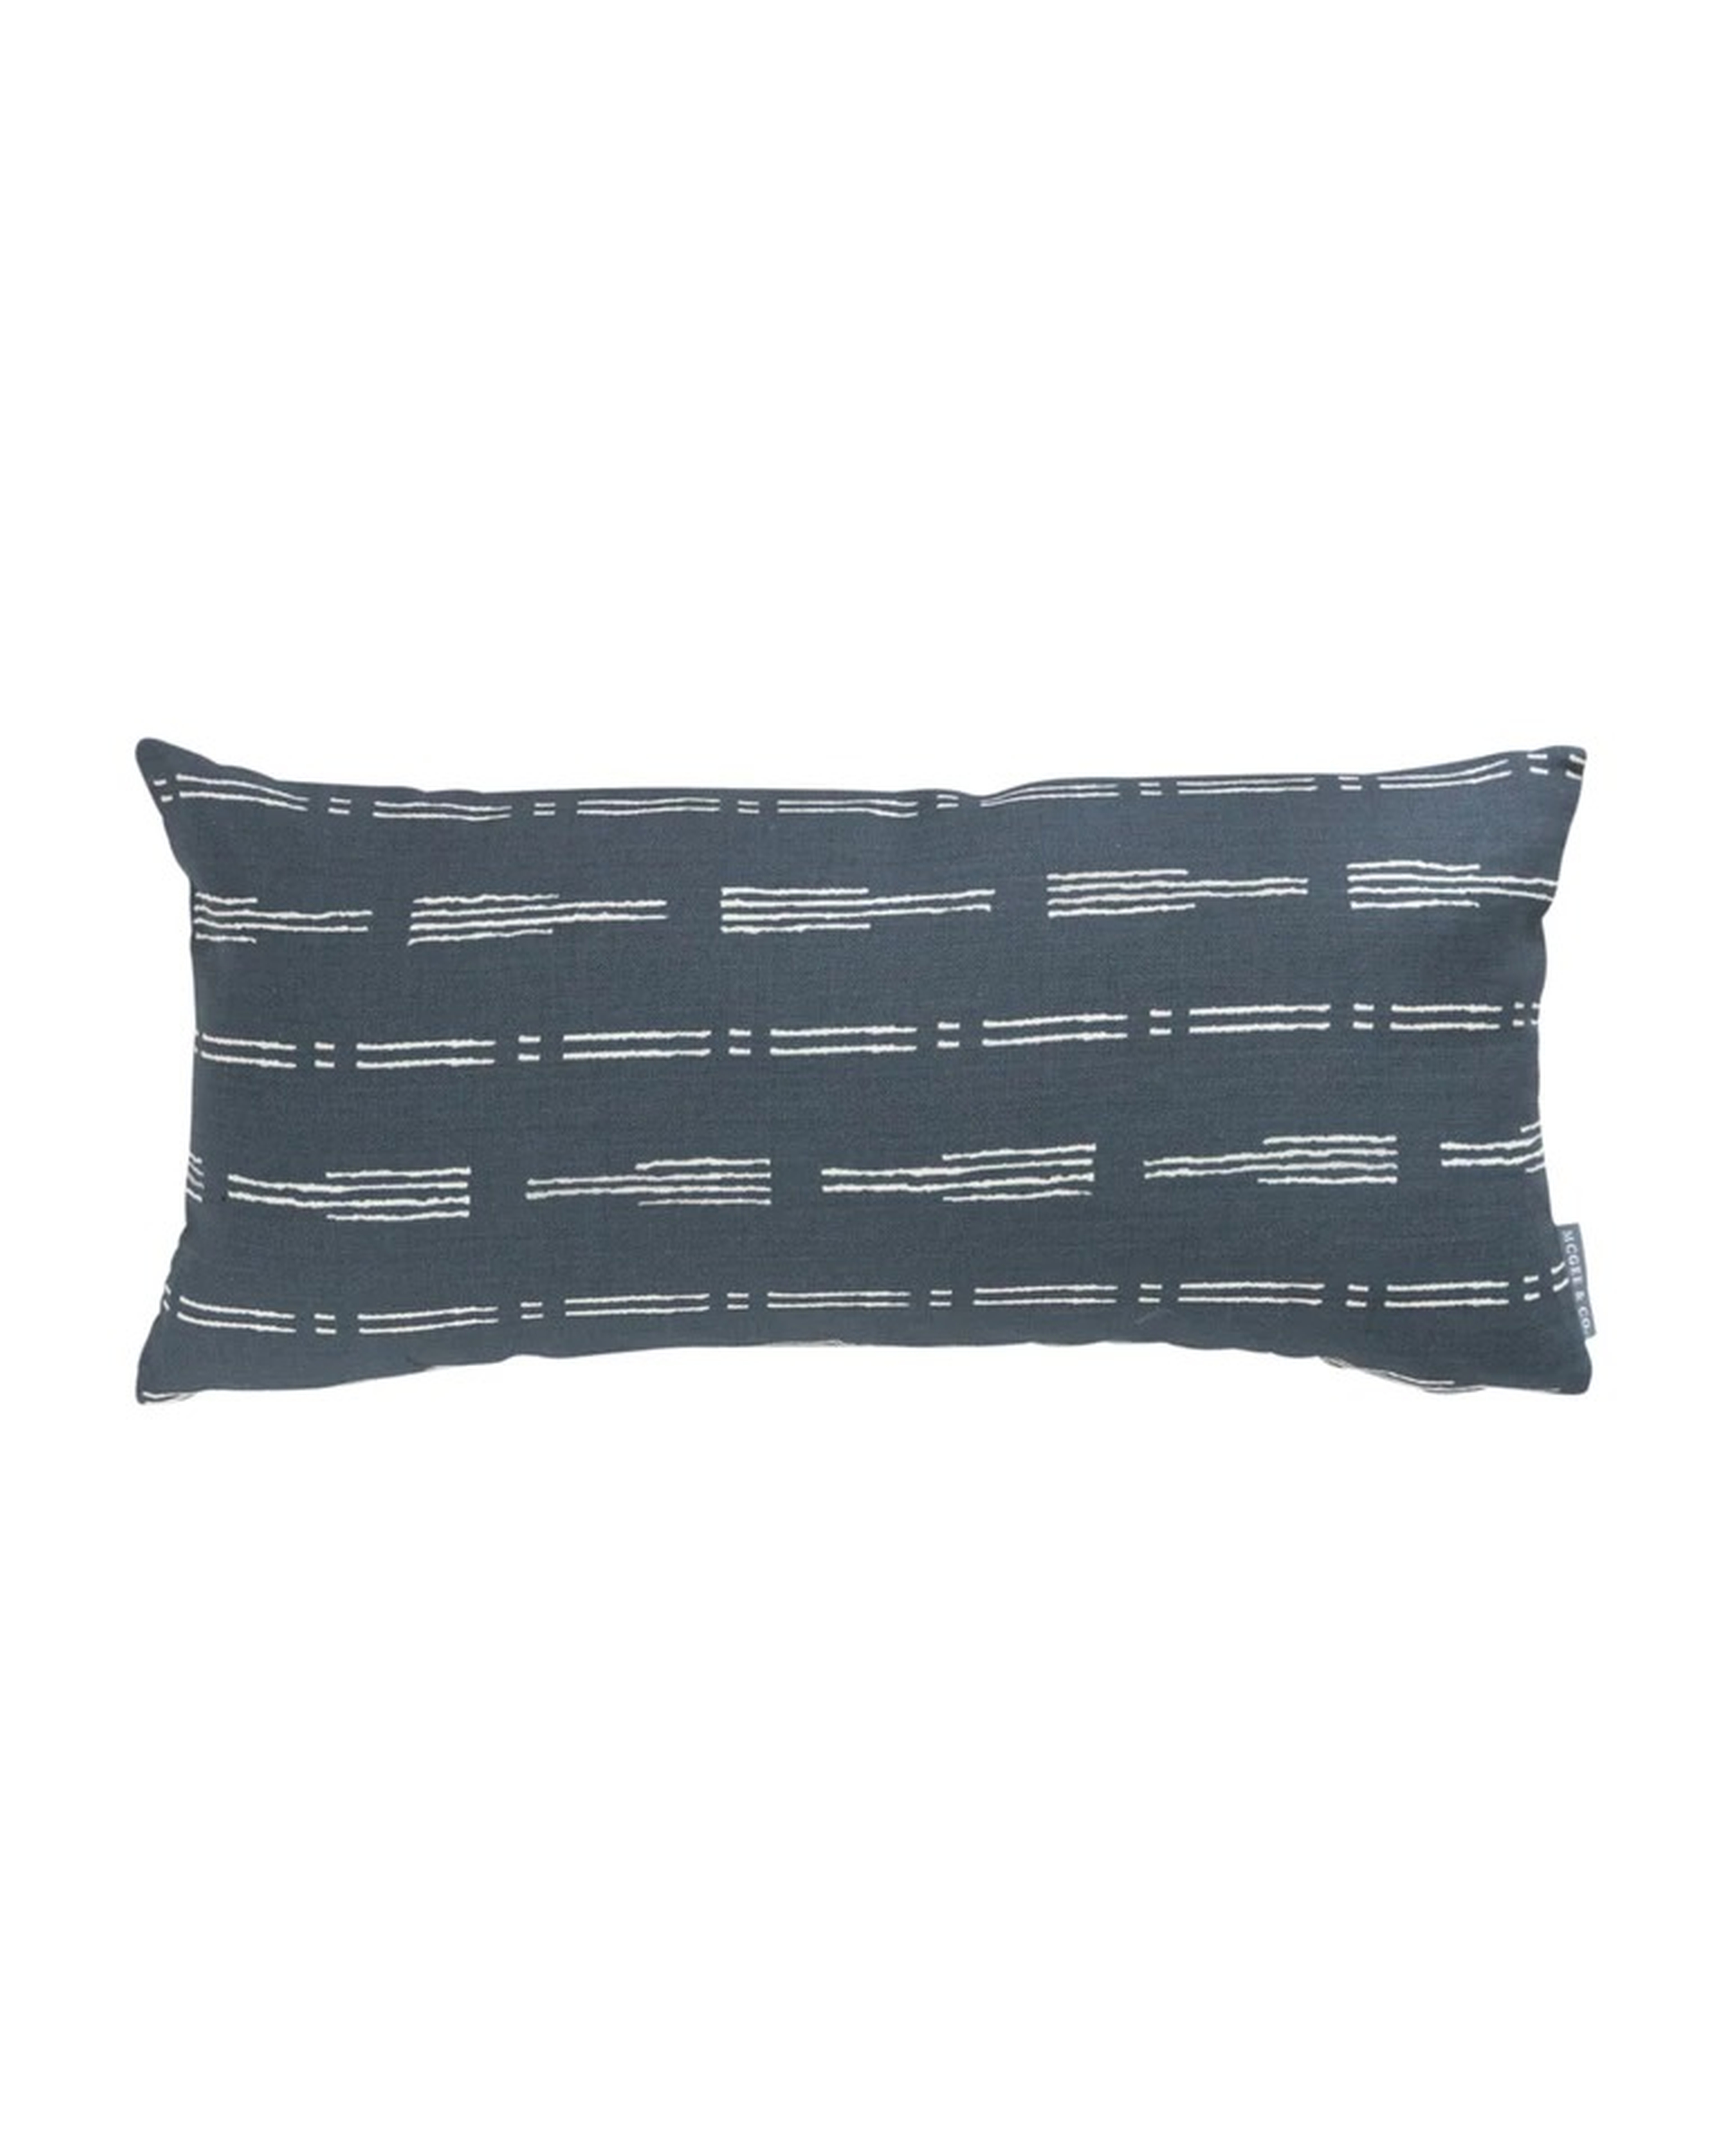 NIK BROKEN STRIPE PILLOW COVER WITHOUT INSERT, NAVY, 12" x 24" - McGee & Co.